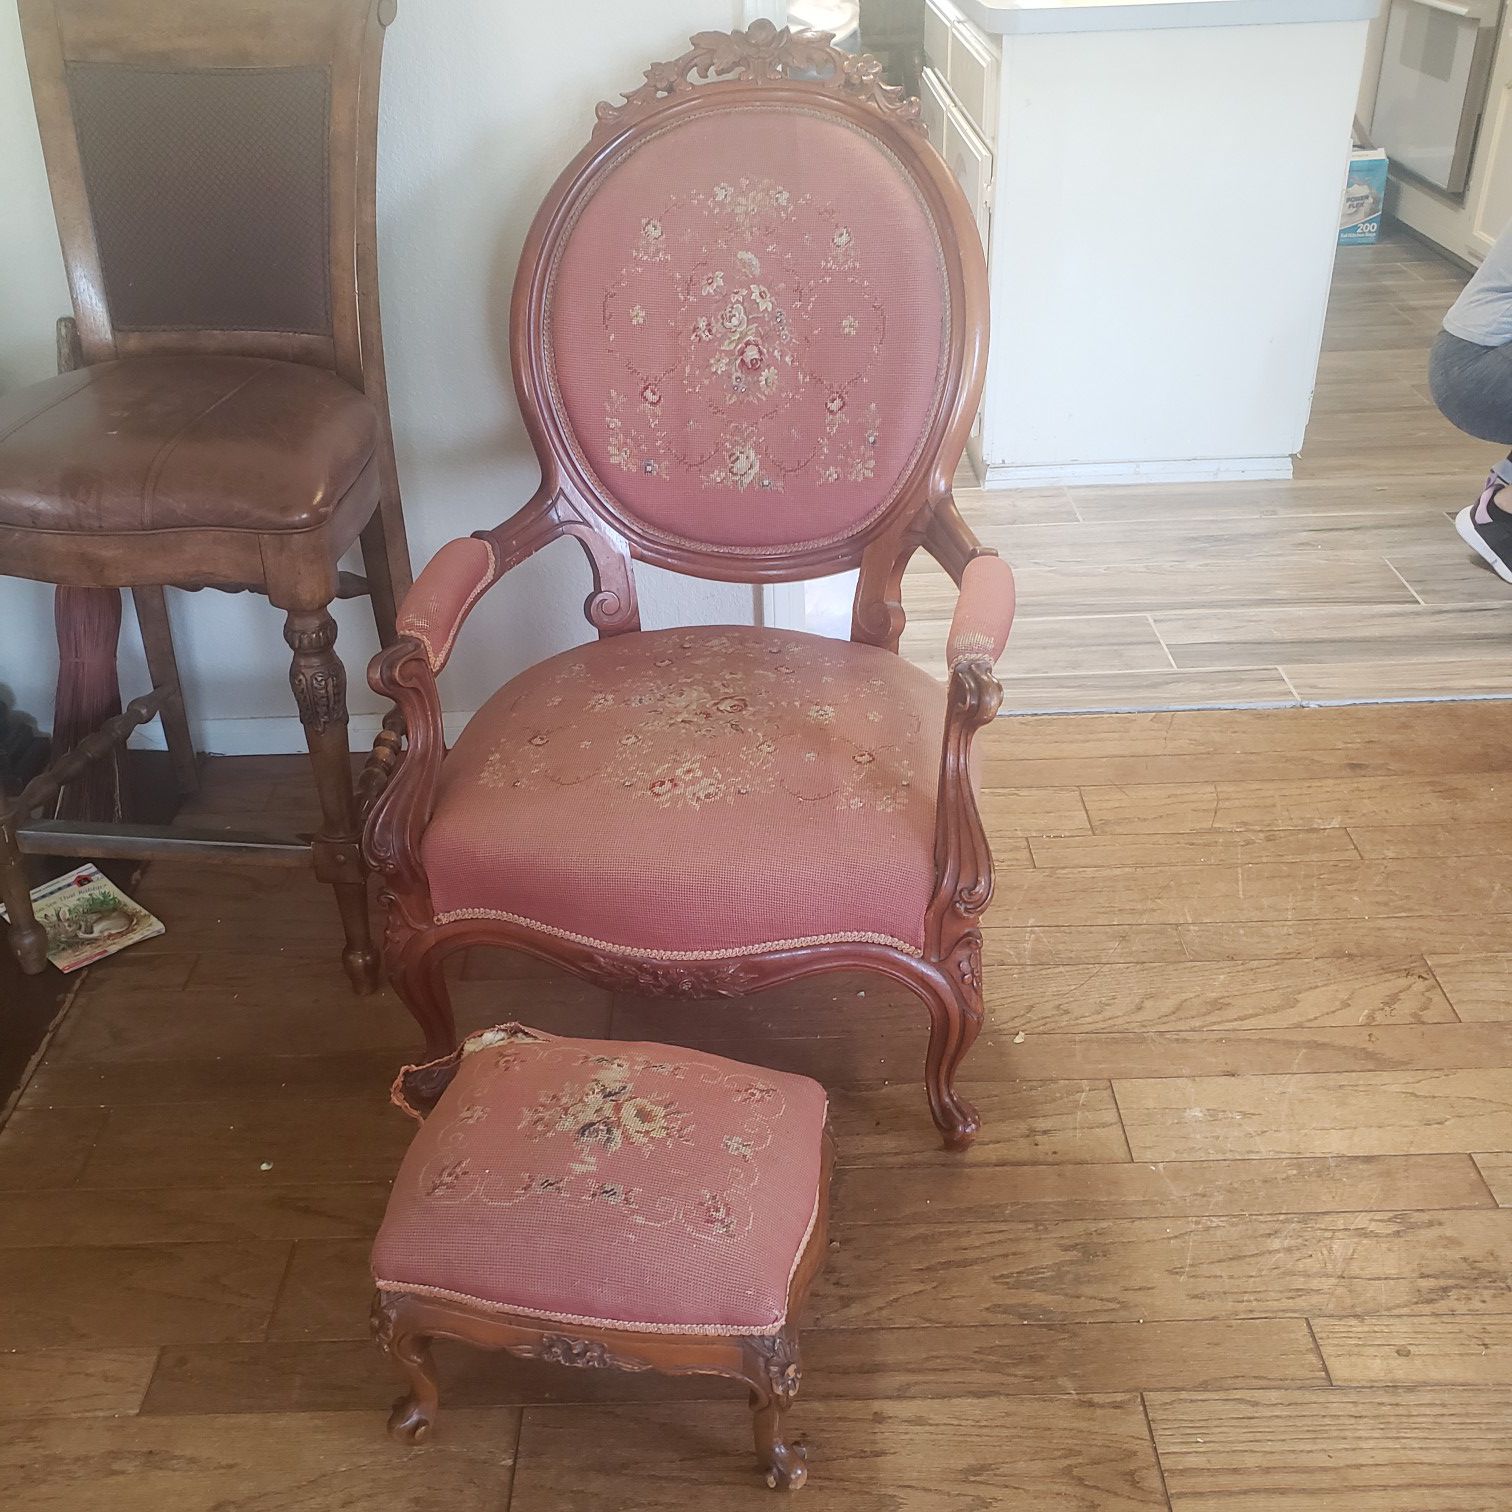 Antique arm chair and stool $150